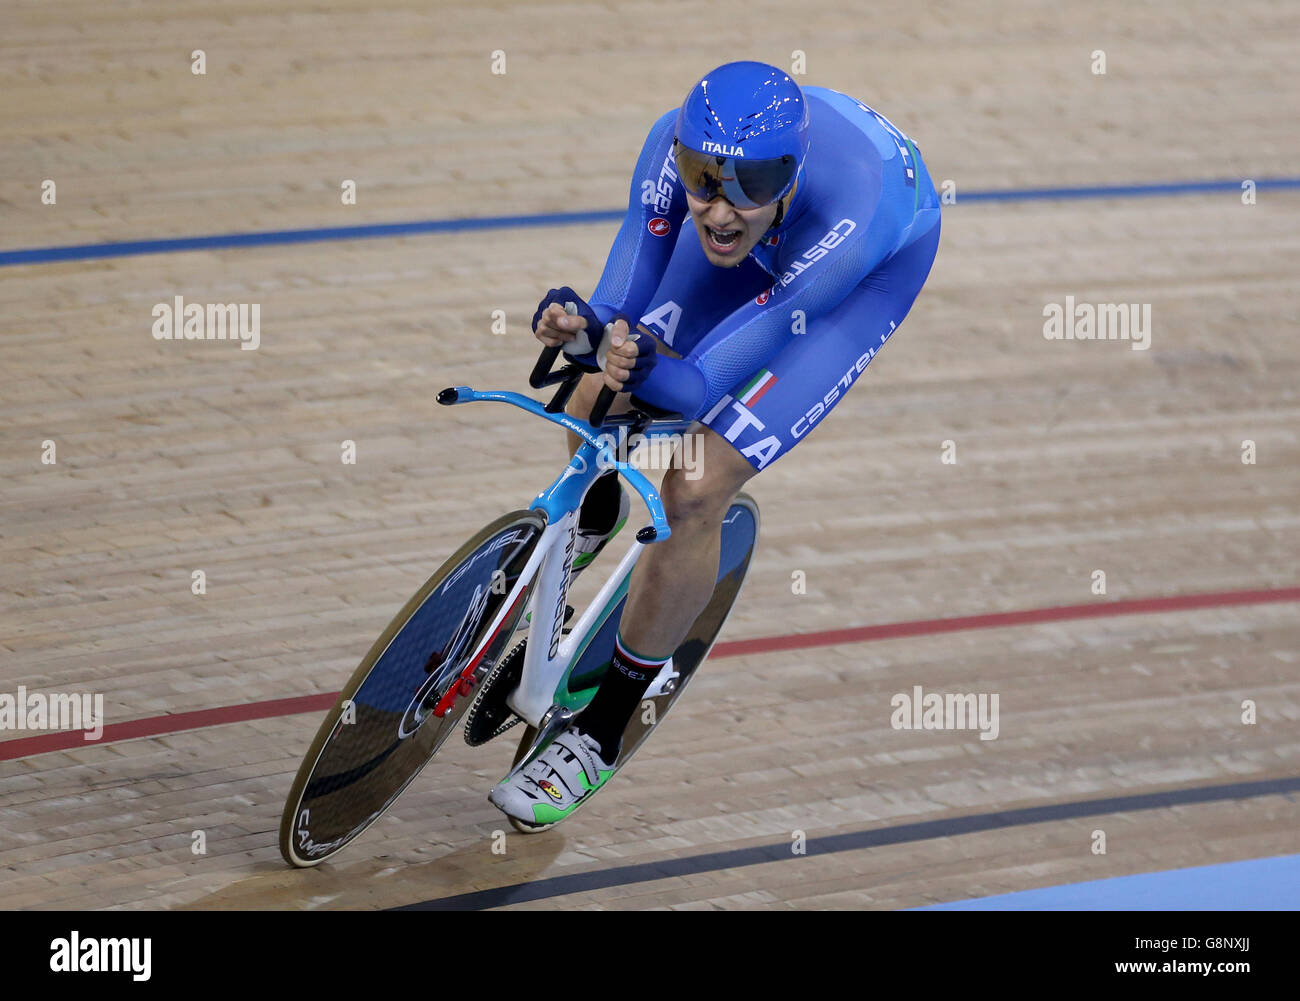 Italy's Filippo Ganna competes in the Men's Individual Pursuit final during day three of the UCI Track Cycling World Championships at Lee Valley VeloPark, London. PRESS ASSOCIATION Photo. Picture date: Friday March 4, 2016. See PA story CYCLING World. Photo credit should read: Tim Goode/PA Wire. Stock Photo